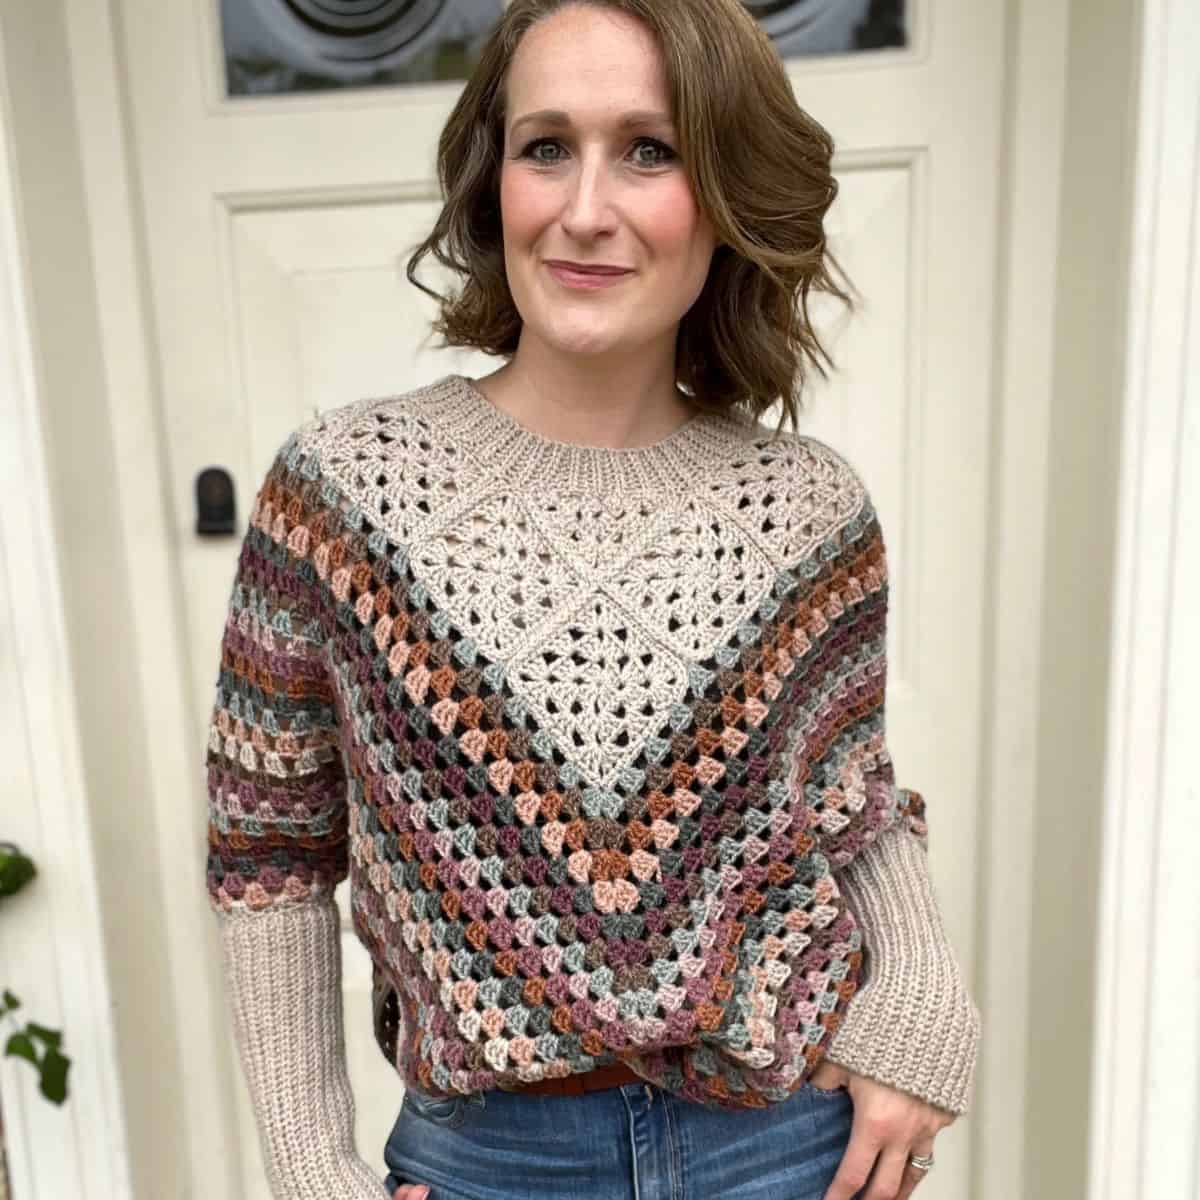 A woman wearing jeans and a crochet garment.